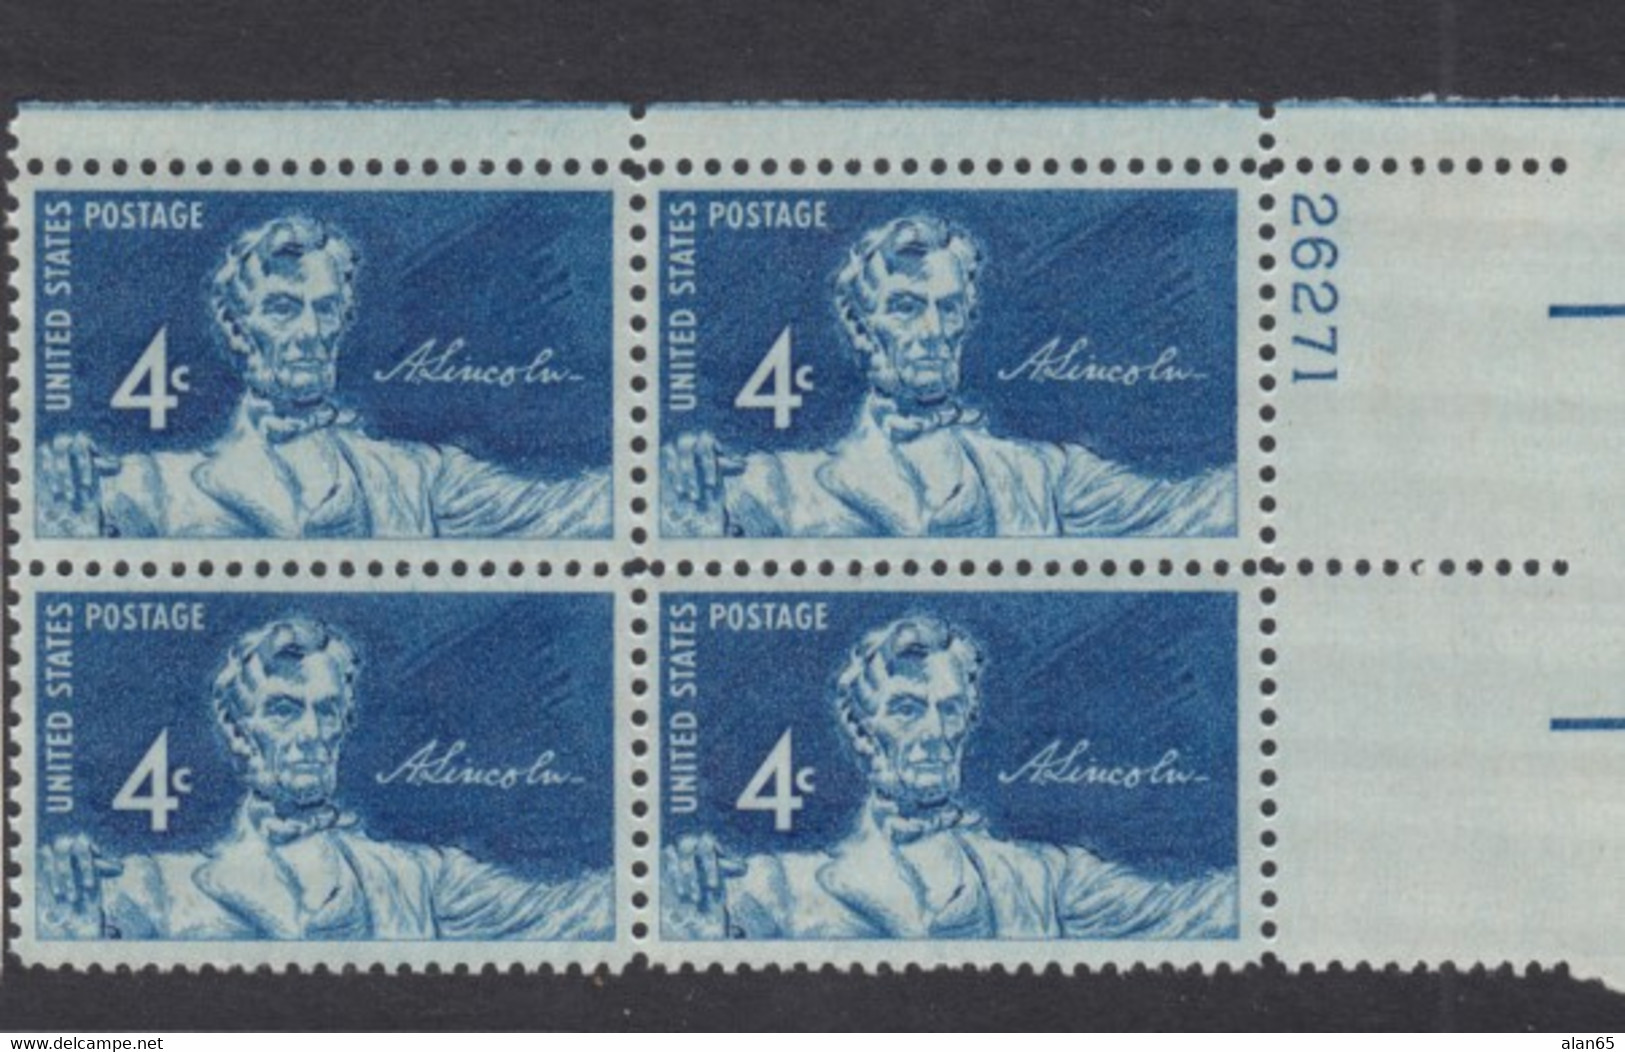 Sc#1116, Plate # Block Of 4 MNH, 4c Lincoln Sesquicentennial Issue, Daniel Chester French Statue US President Lincoln - Numéros De Planches